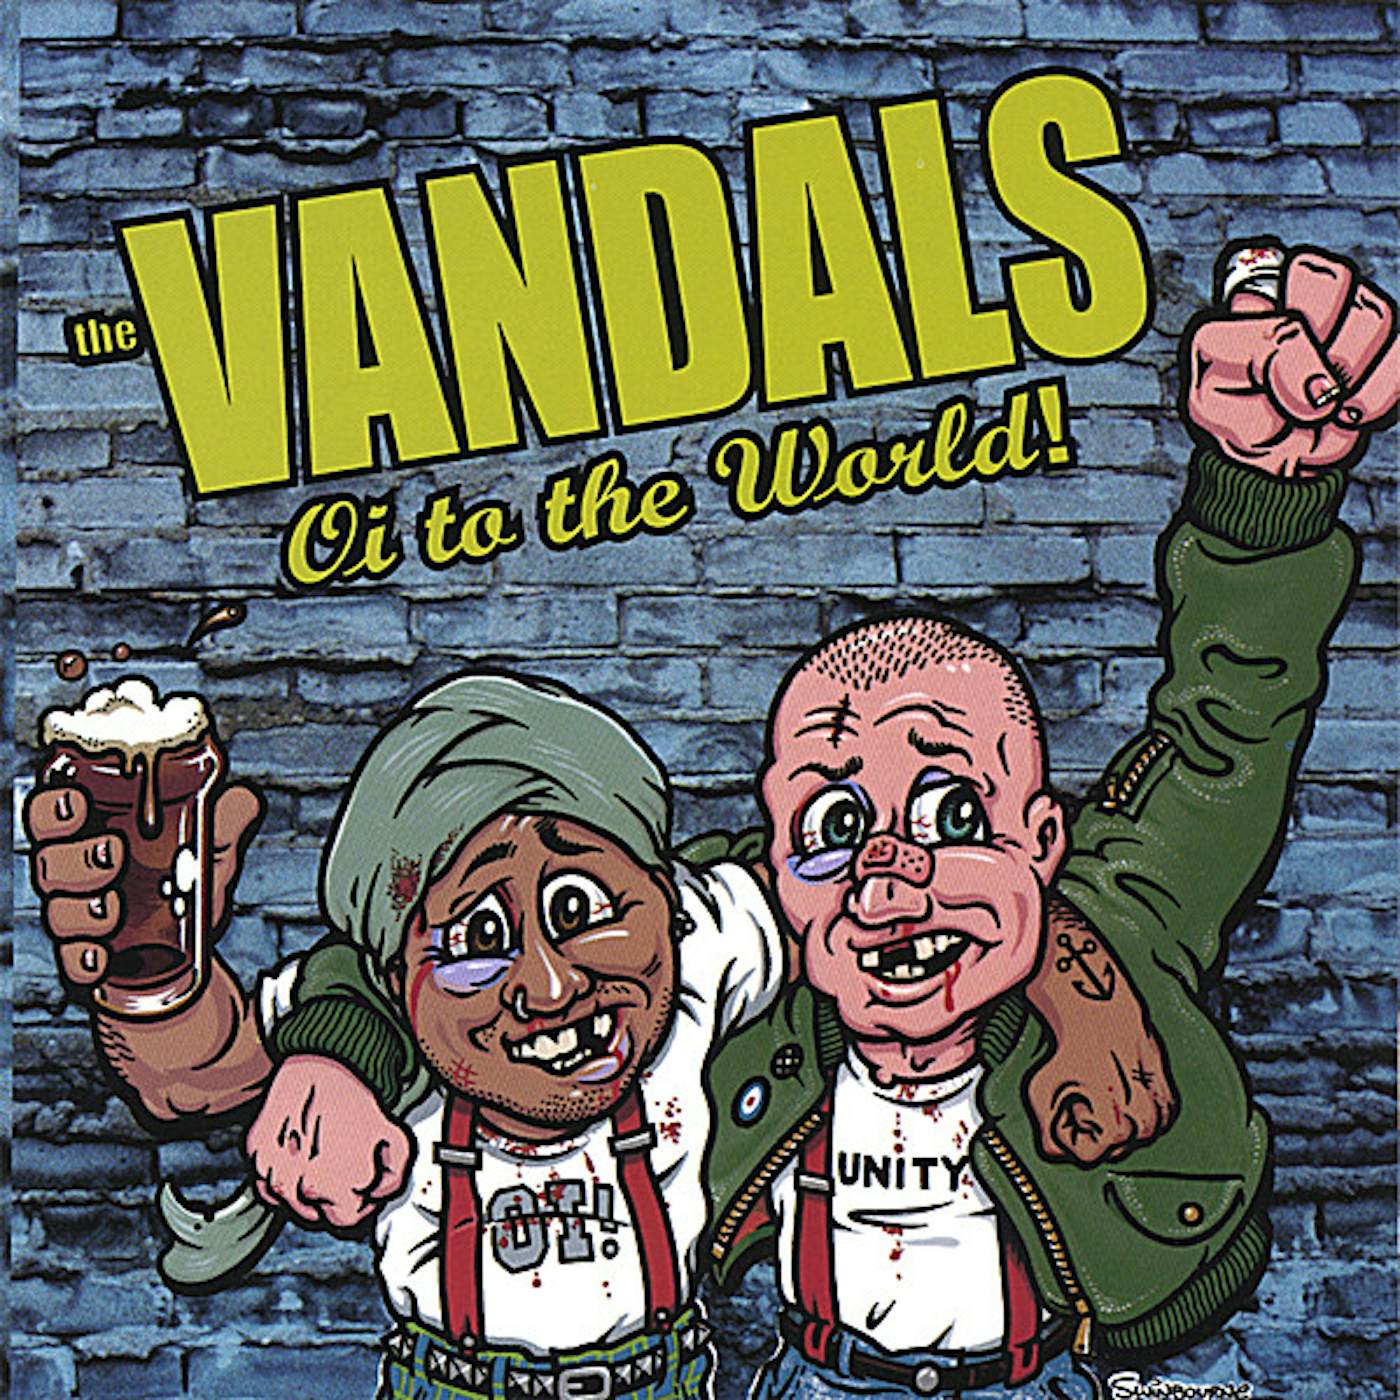 The Vandals  OI TO THE WORLD CD